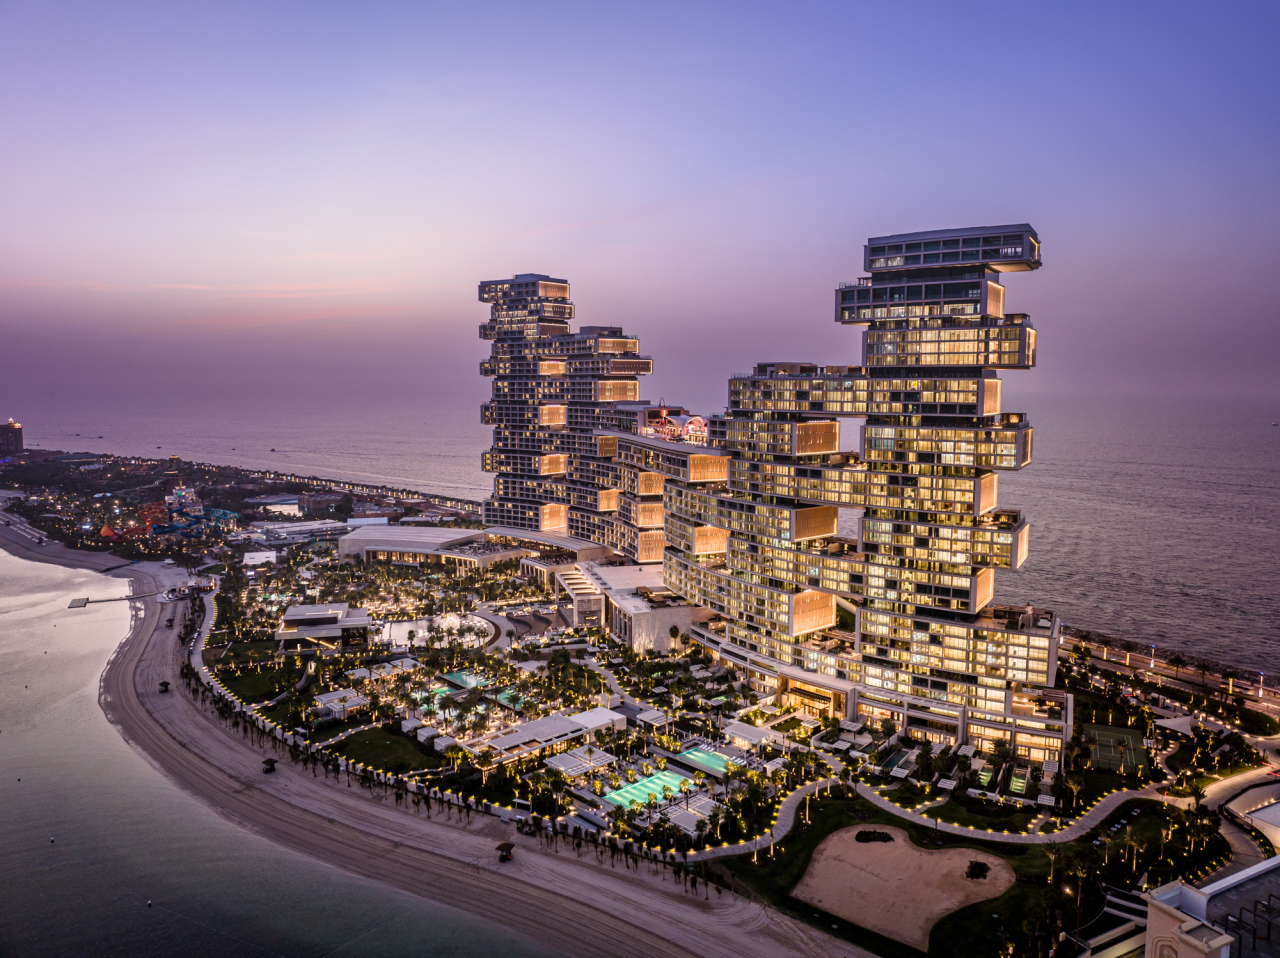 Atlantis the Royal comprises three 44-story five-star hotels and three residence hotels, with a 90-meter sky pool connecting the buildings. (Ssangyong E&C)